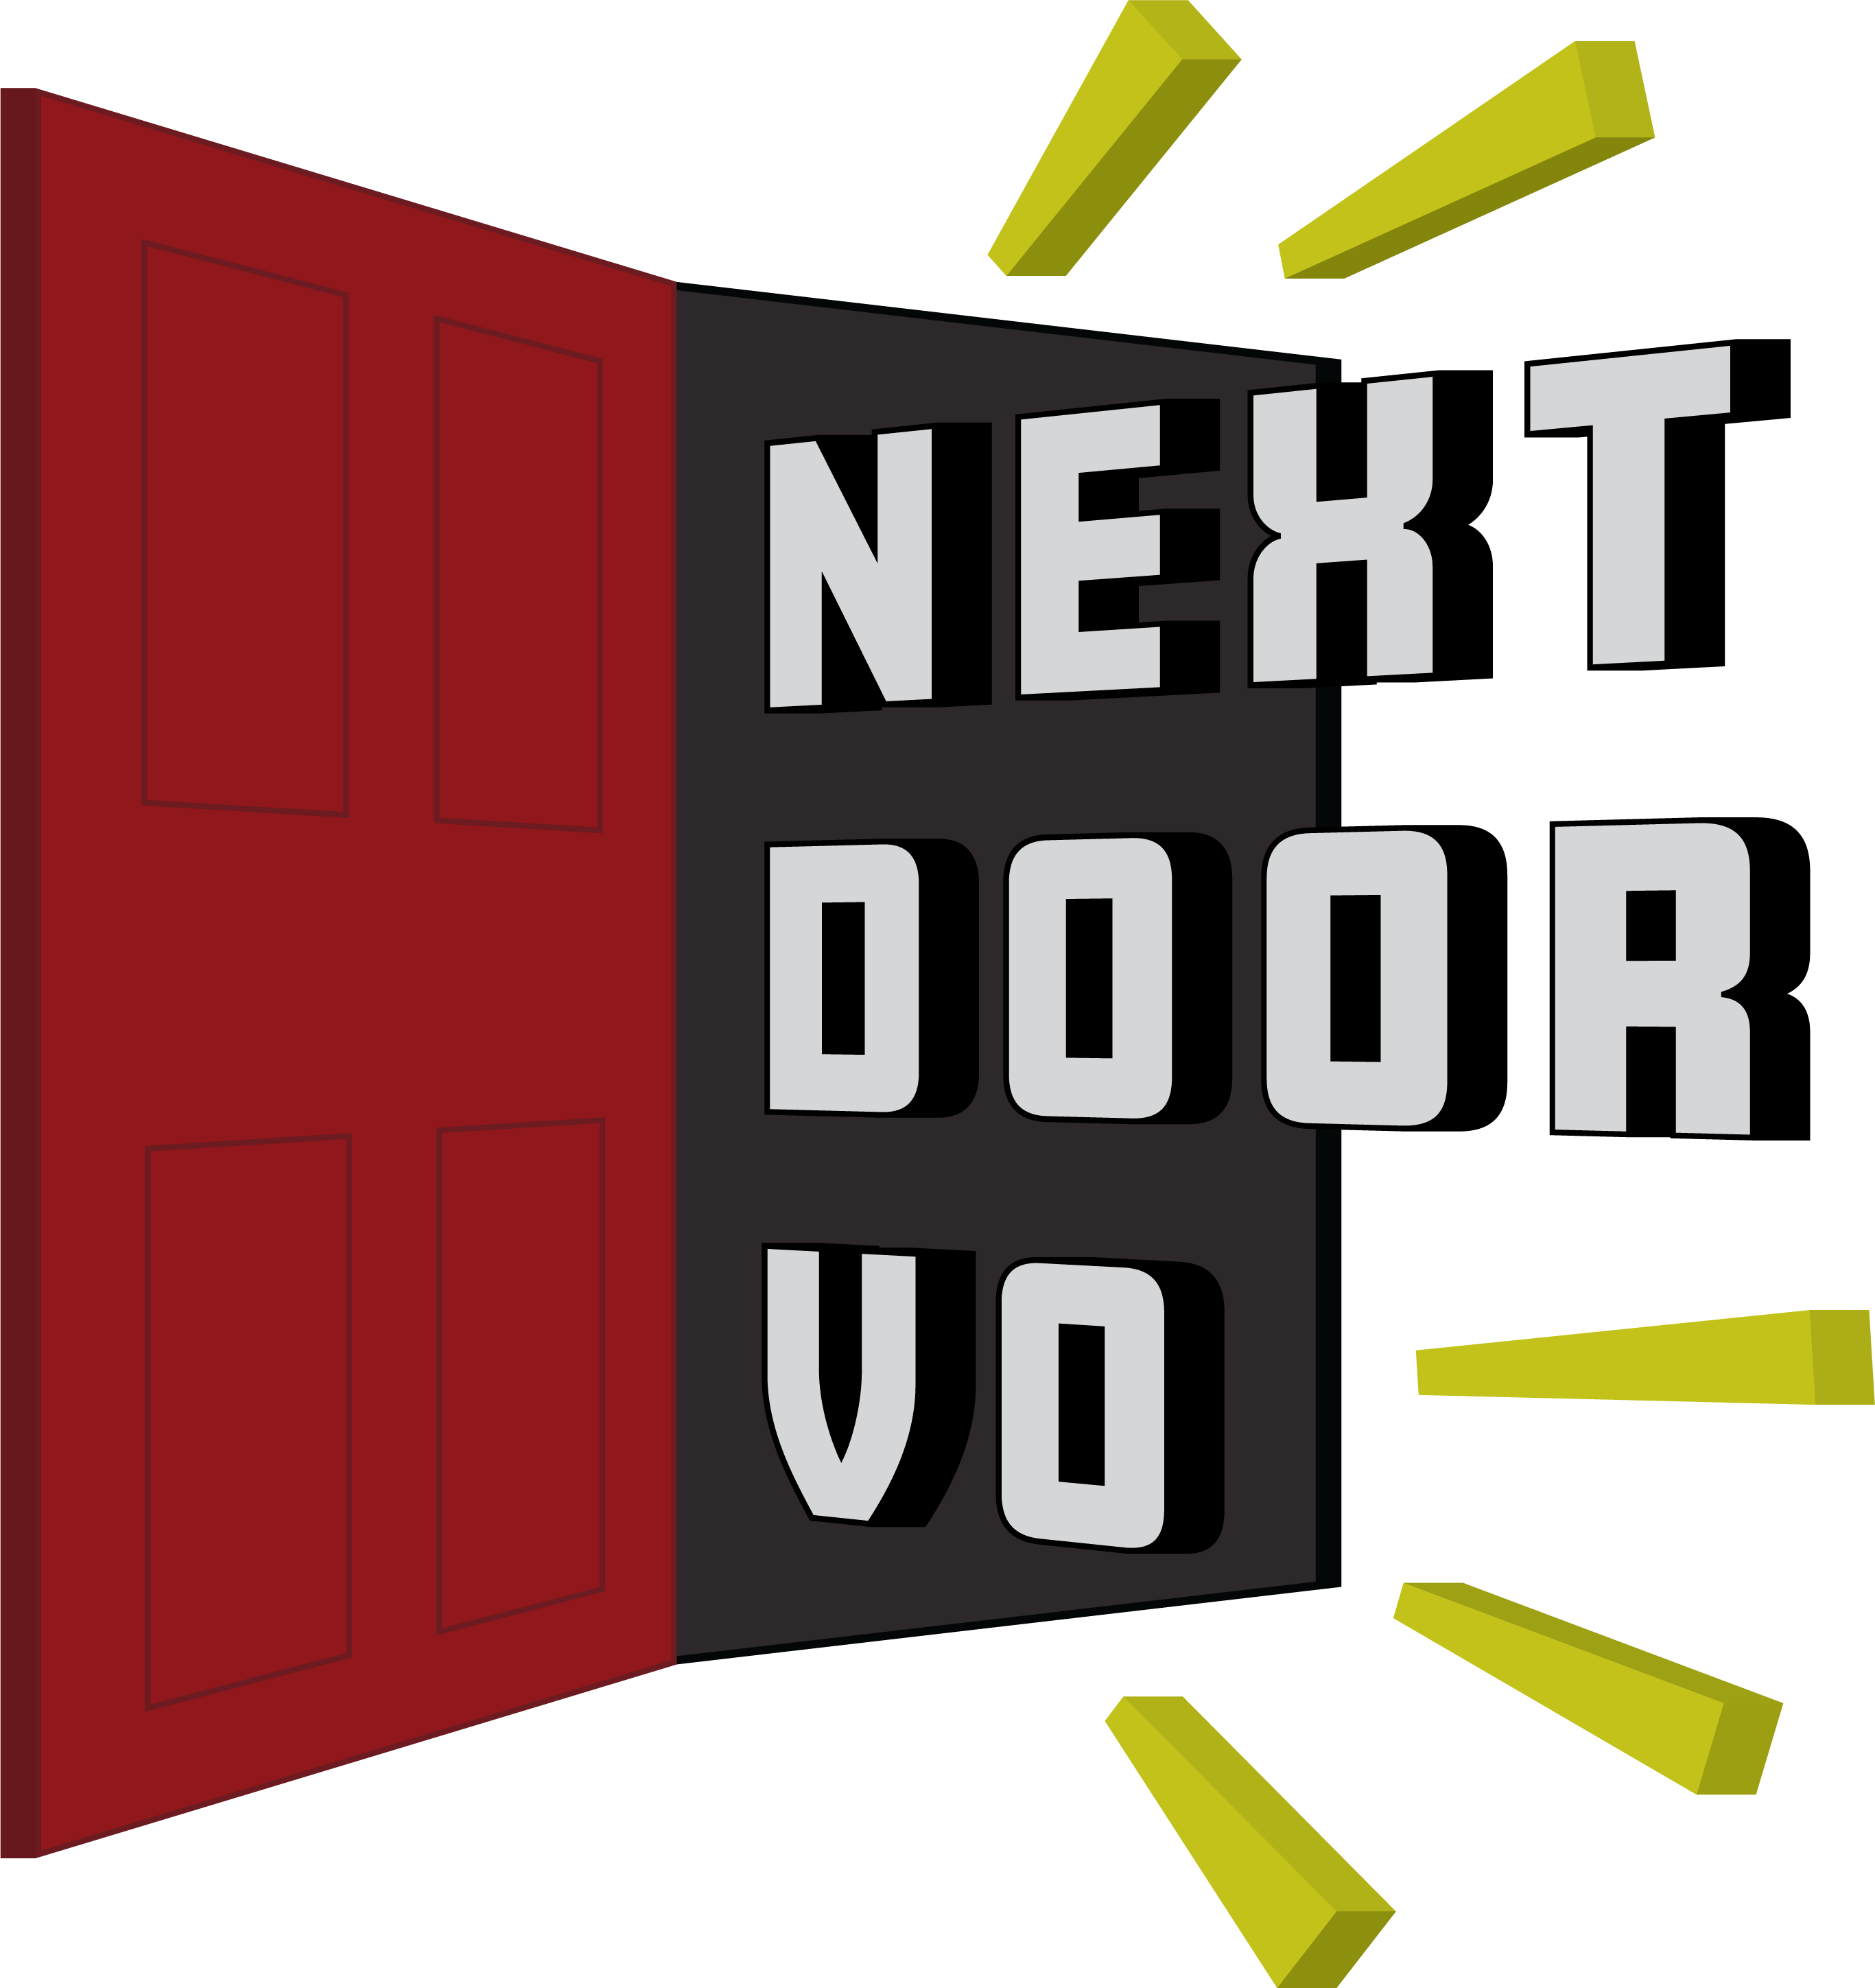 Logo - The words Next Door VO kicking open a red door with yellow action lines appearing out from the sides